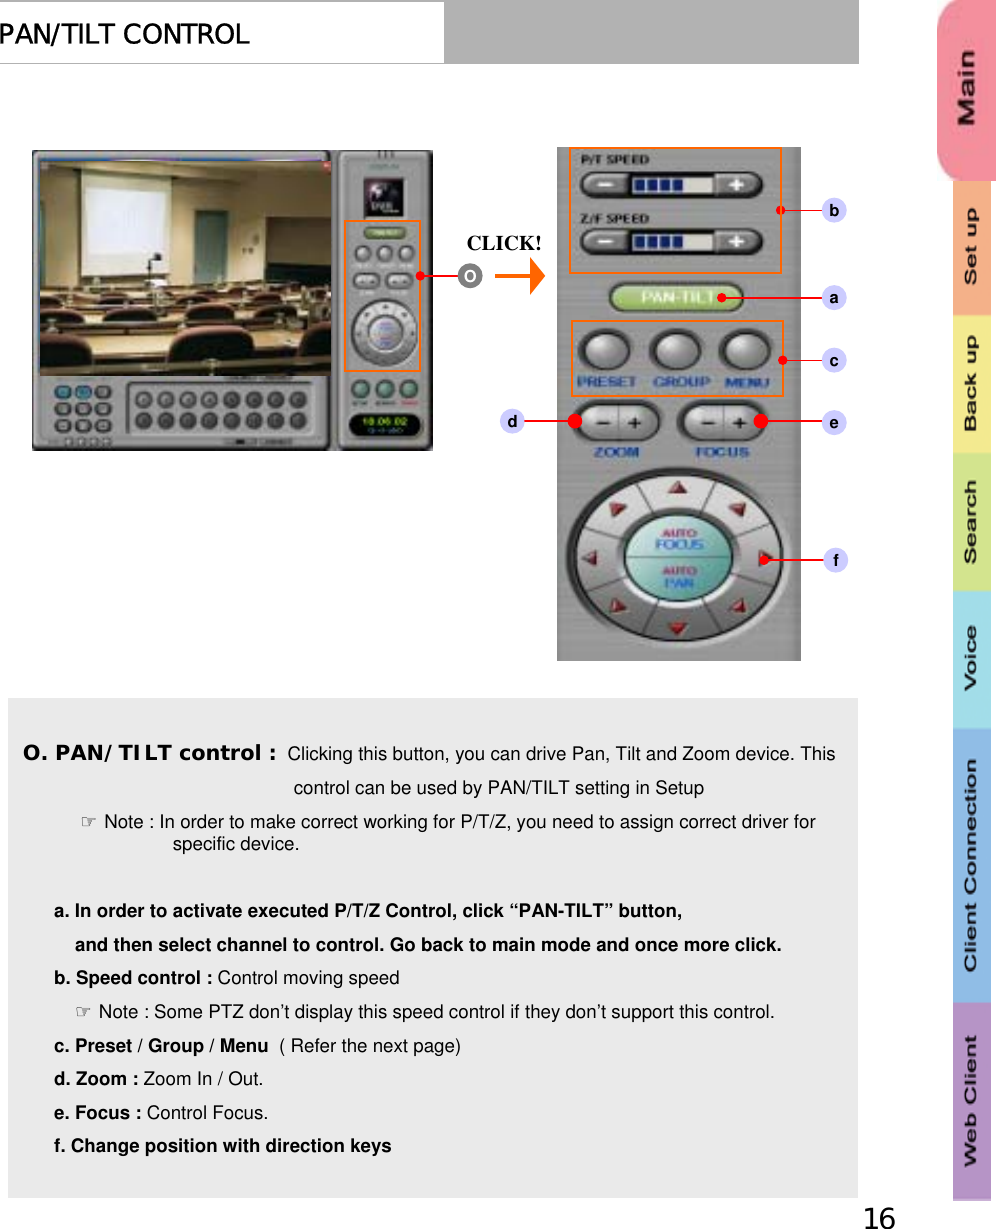 16PAN/TILT CONTROLaeO. PAN/TILT control : Clicking this button, you can drive Pan, Tilt and Zoom device. This control can be used by PAN/TILT setting in Setup☞Note : In order to make correct working for P/T/Z, you need to assign correct driver for specific device.a. In order to activate executed P/T/Z Control, click “PAN-TILT” button,and then select channel to control. Go back to main mode and once more click.b. Speed control : Control moving speed☞Note : Some PTZ don’t display this speed control if they don’t support this control.c. Preset / Group / Menu  ( Refer the next page) d. Zoom : Zoom In / Out. e. Focus : Control Focus.f. Change position with direction keys CLICK!Obcdf